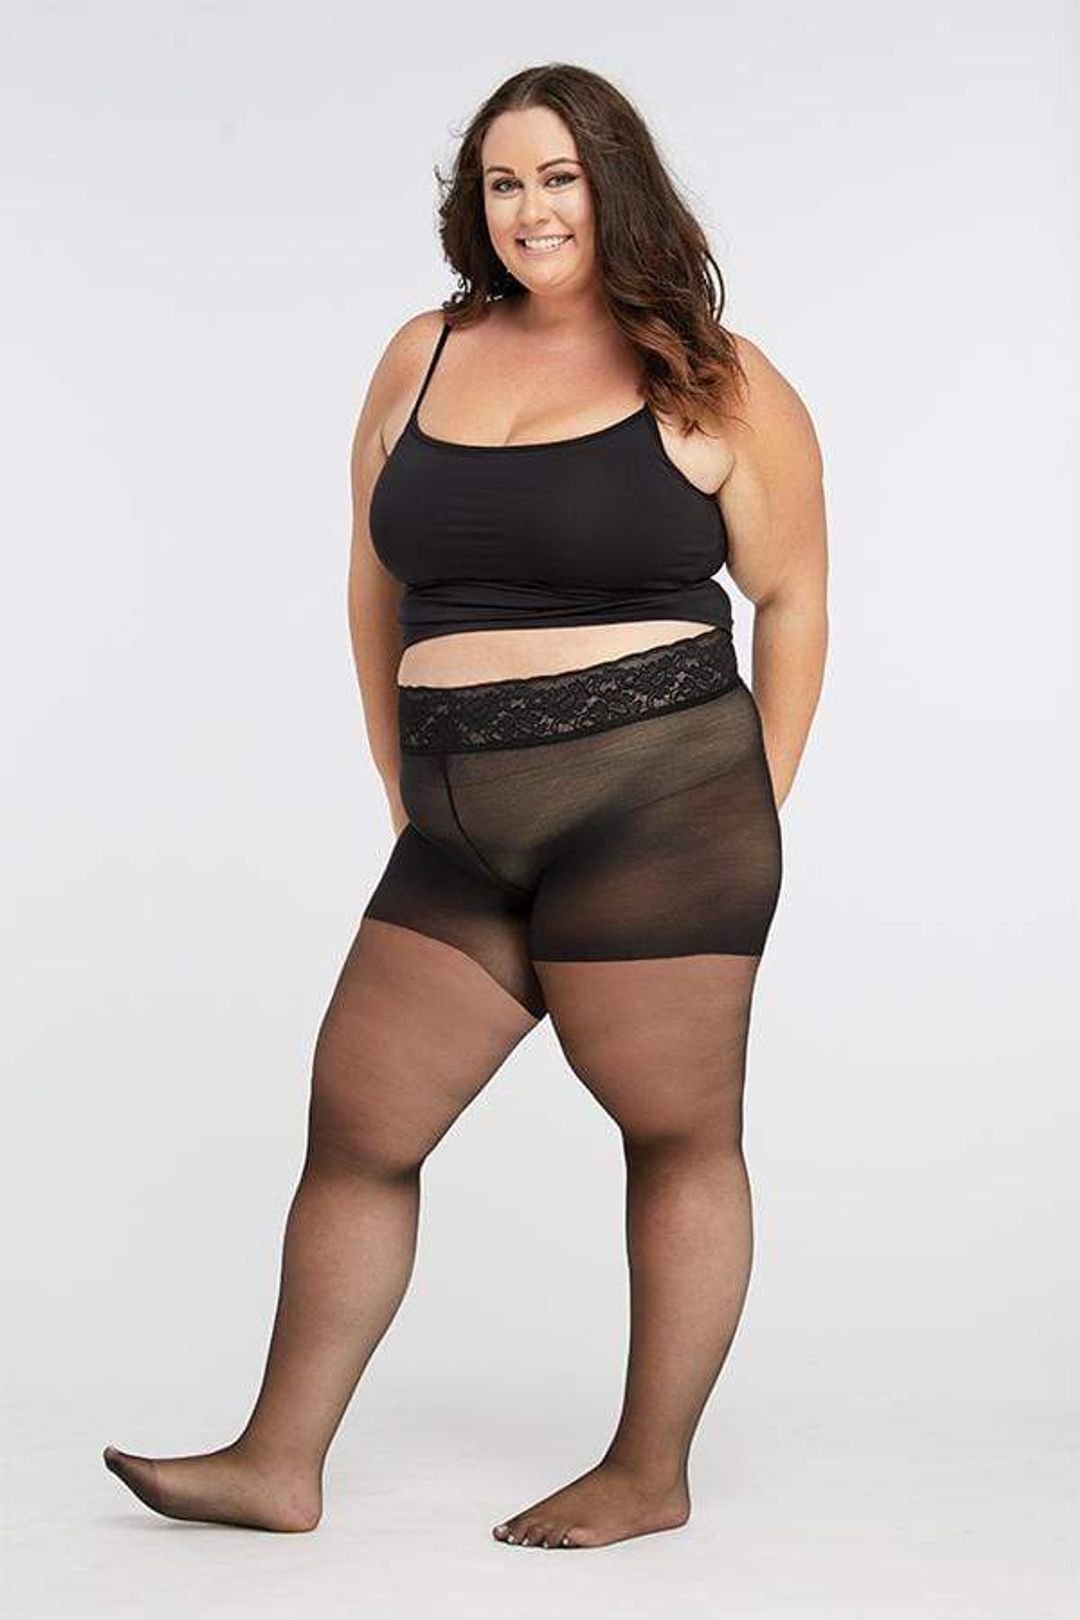 amit banerji recommends large women in pantyhose pic